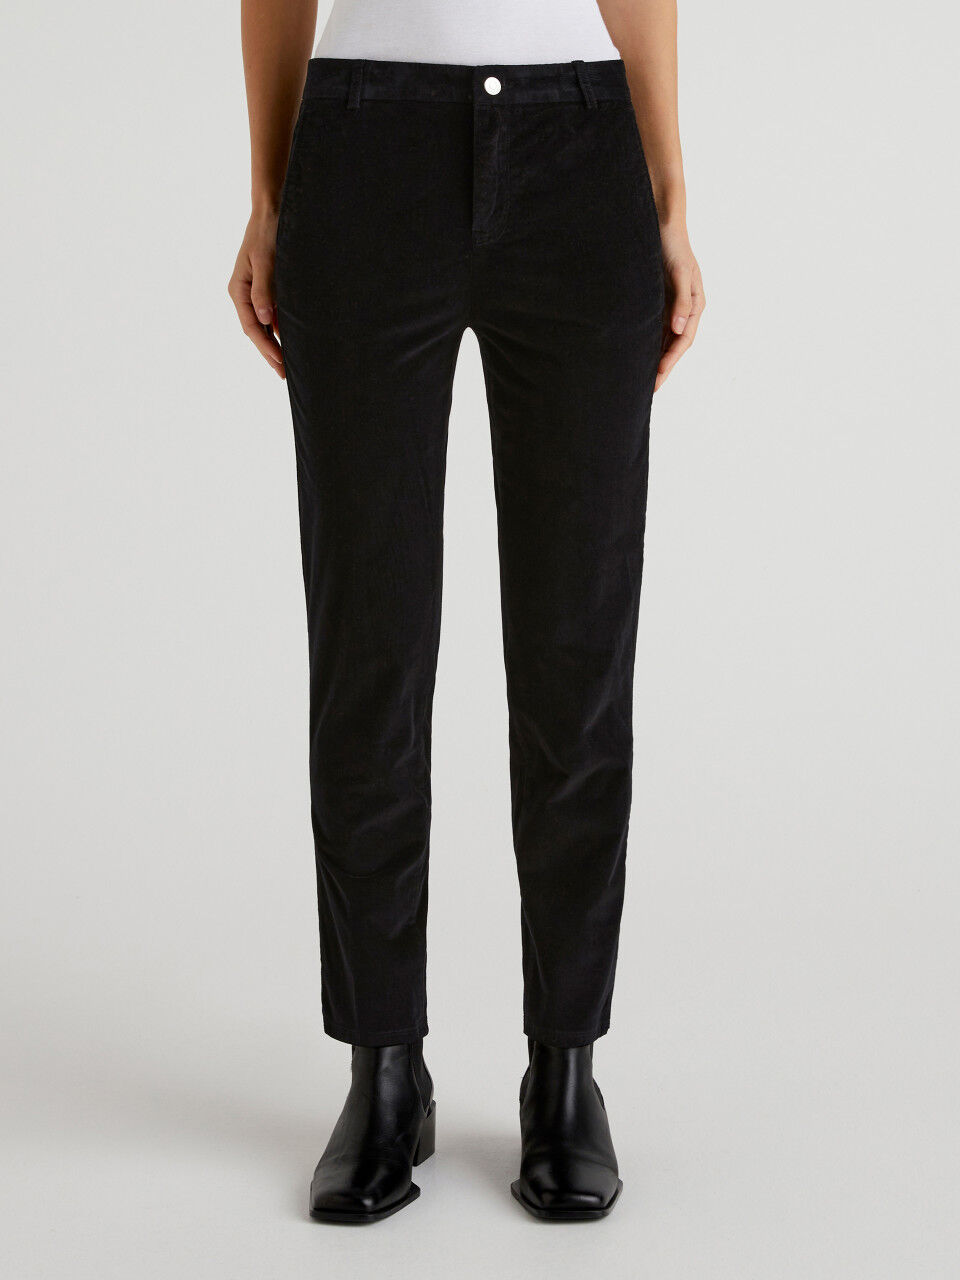 Slacks and Chinos Skinny trousers Womens Clothing Trousers Balmain Velvet Hip Cut Skinny Bootcut Trousers in Black 